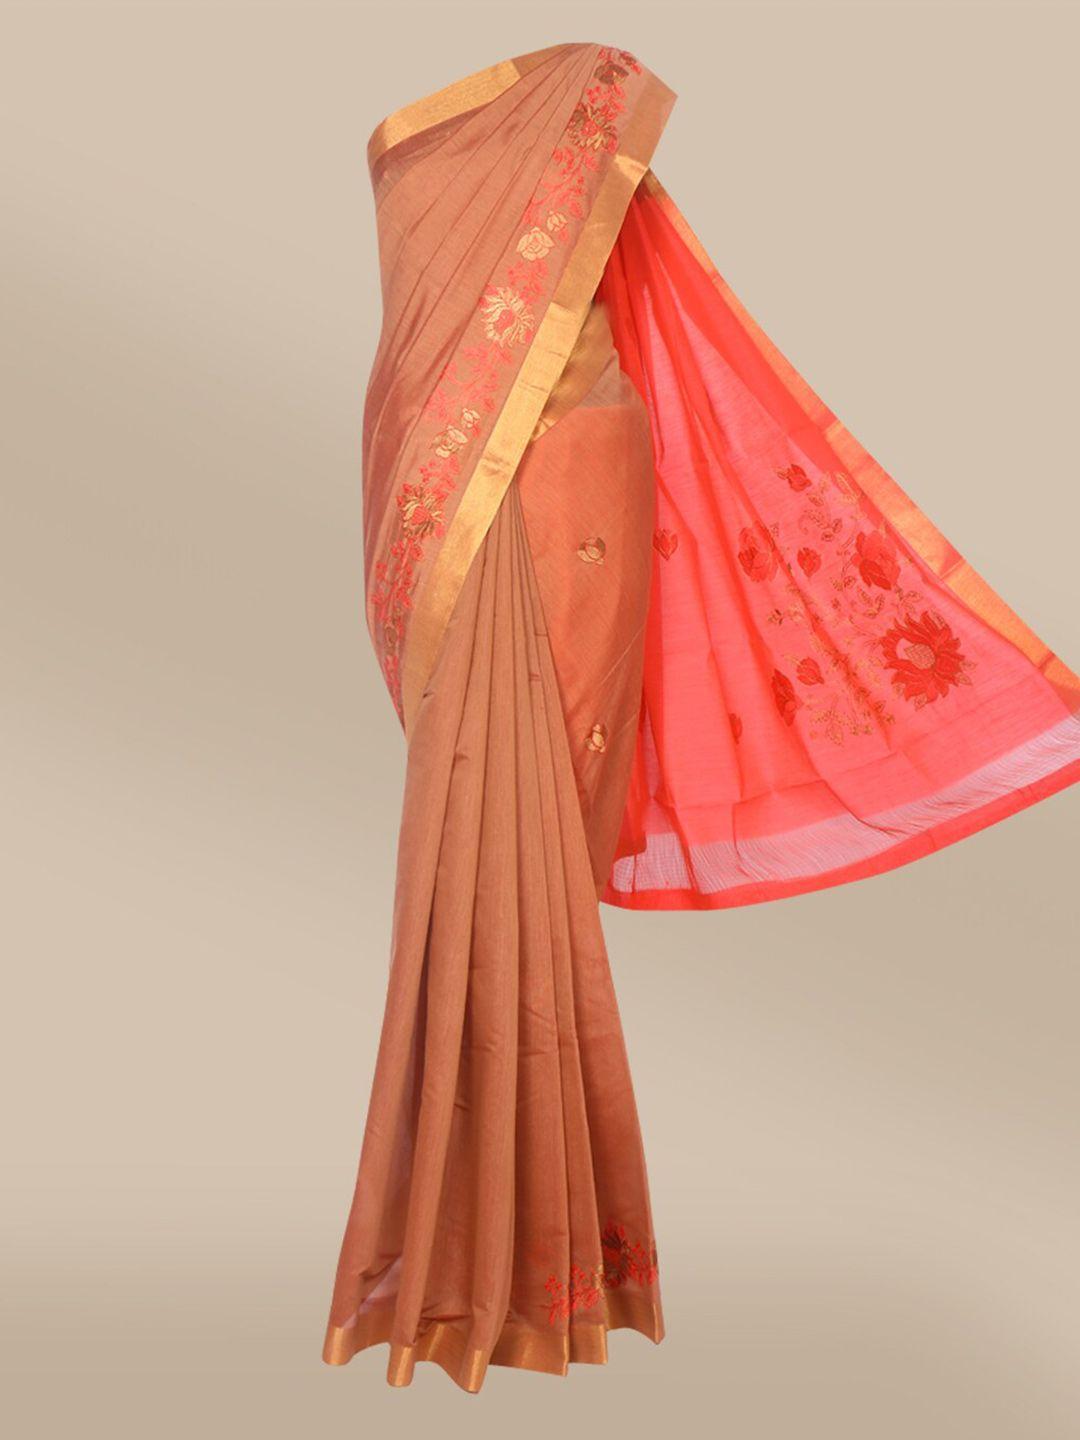 the chennai silks brown & gold-toned floral embroidered saree